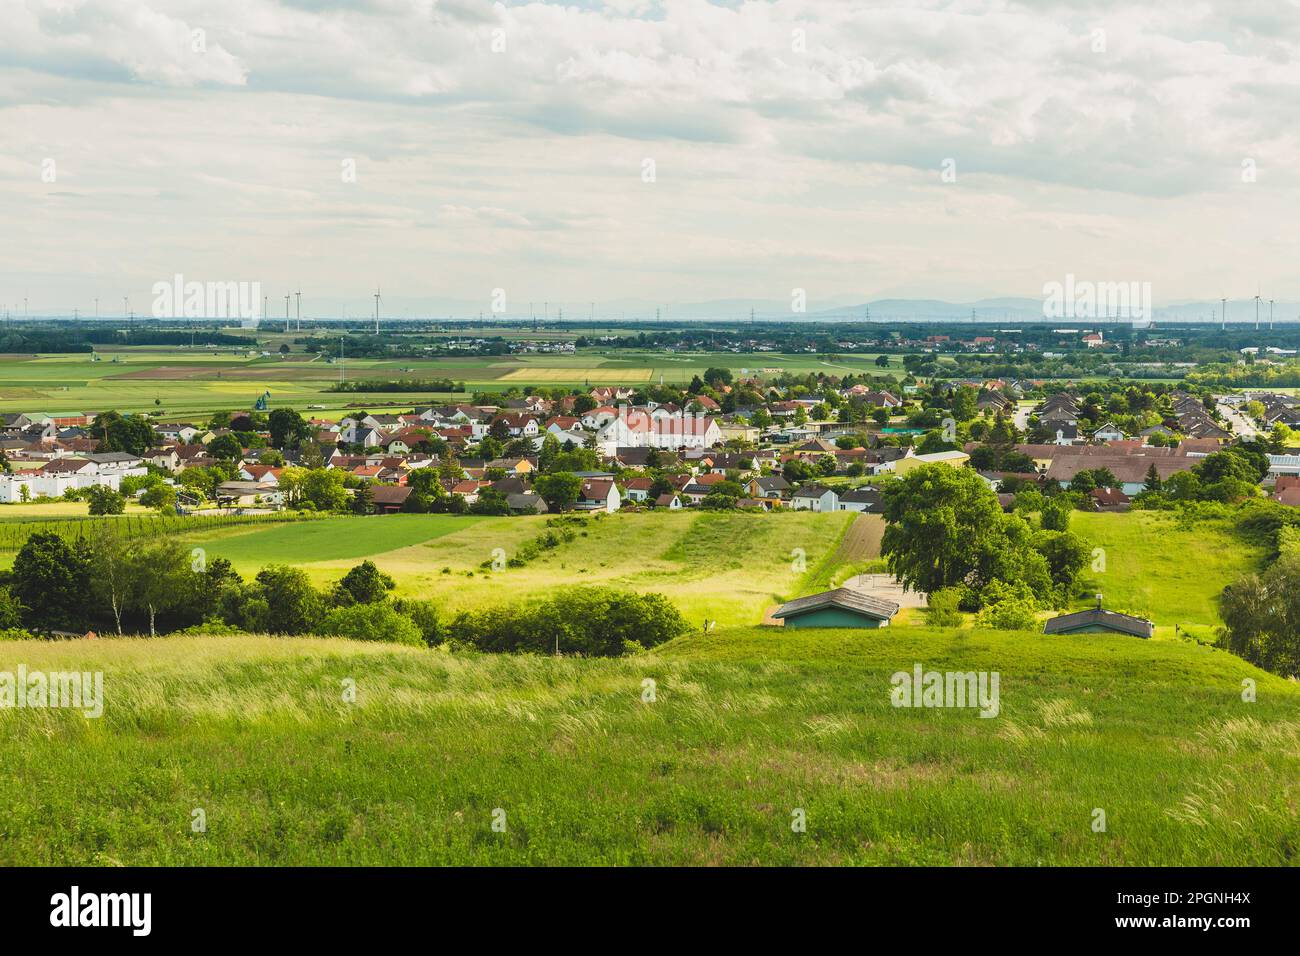 Austria, Lower Austria, Prottes, View of village surrounded by green summer fields Stock Photo